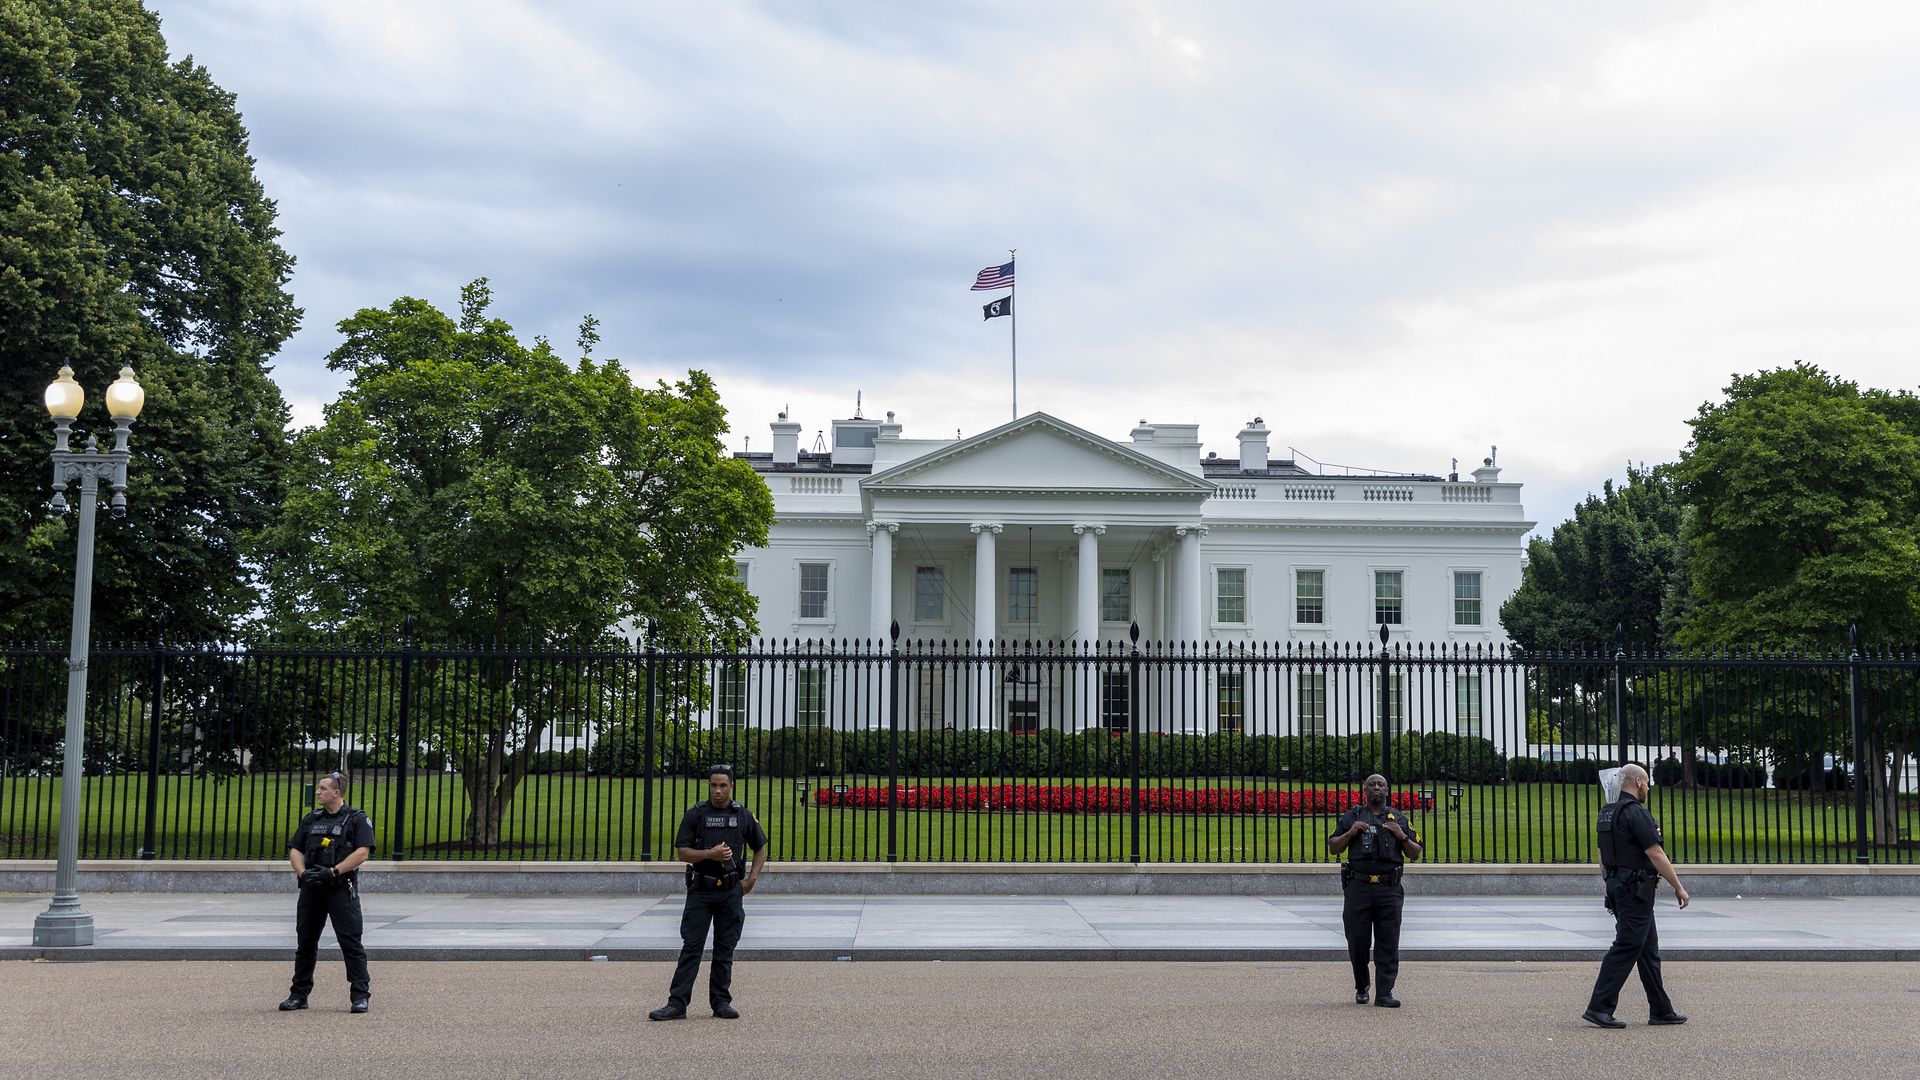 Secret Service Agents stand watch as abortion rights protesters gather at the White House to denounce the U.S. Supreme Court decision to end federal abortion rights protections on June 26, 2022.